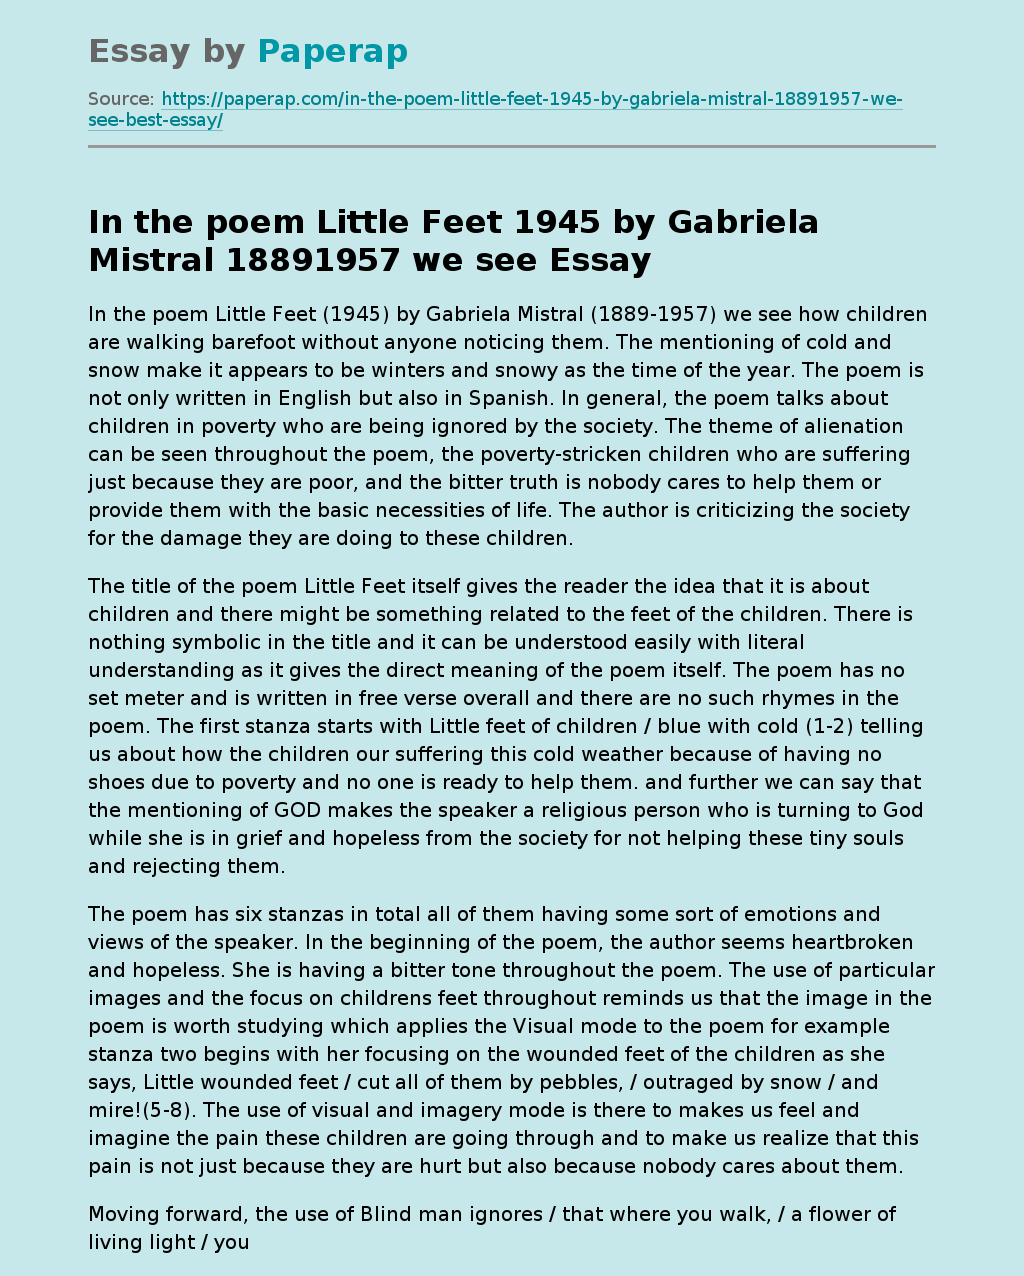 In the poem Little Feet 1945 by Gabriela Mistral 18891957 we see